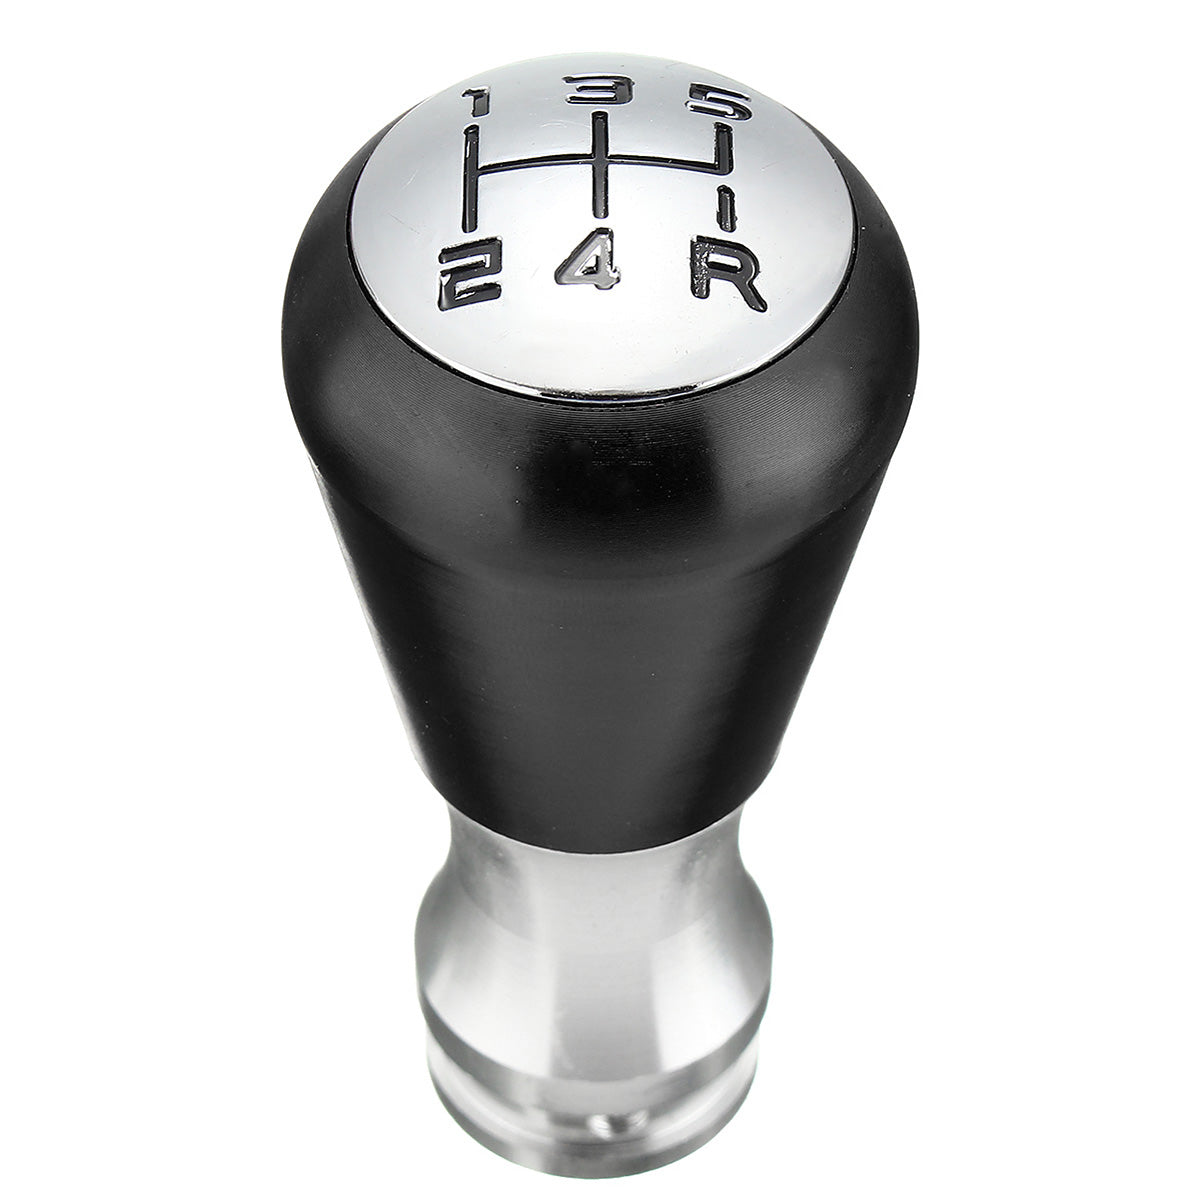 Dark Slate Gray 5 Speed Manual Gear Shift Knob Aluminum Alloy Black/Blue/Red with Adapter For Peugeot 405 307 206